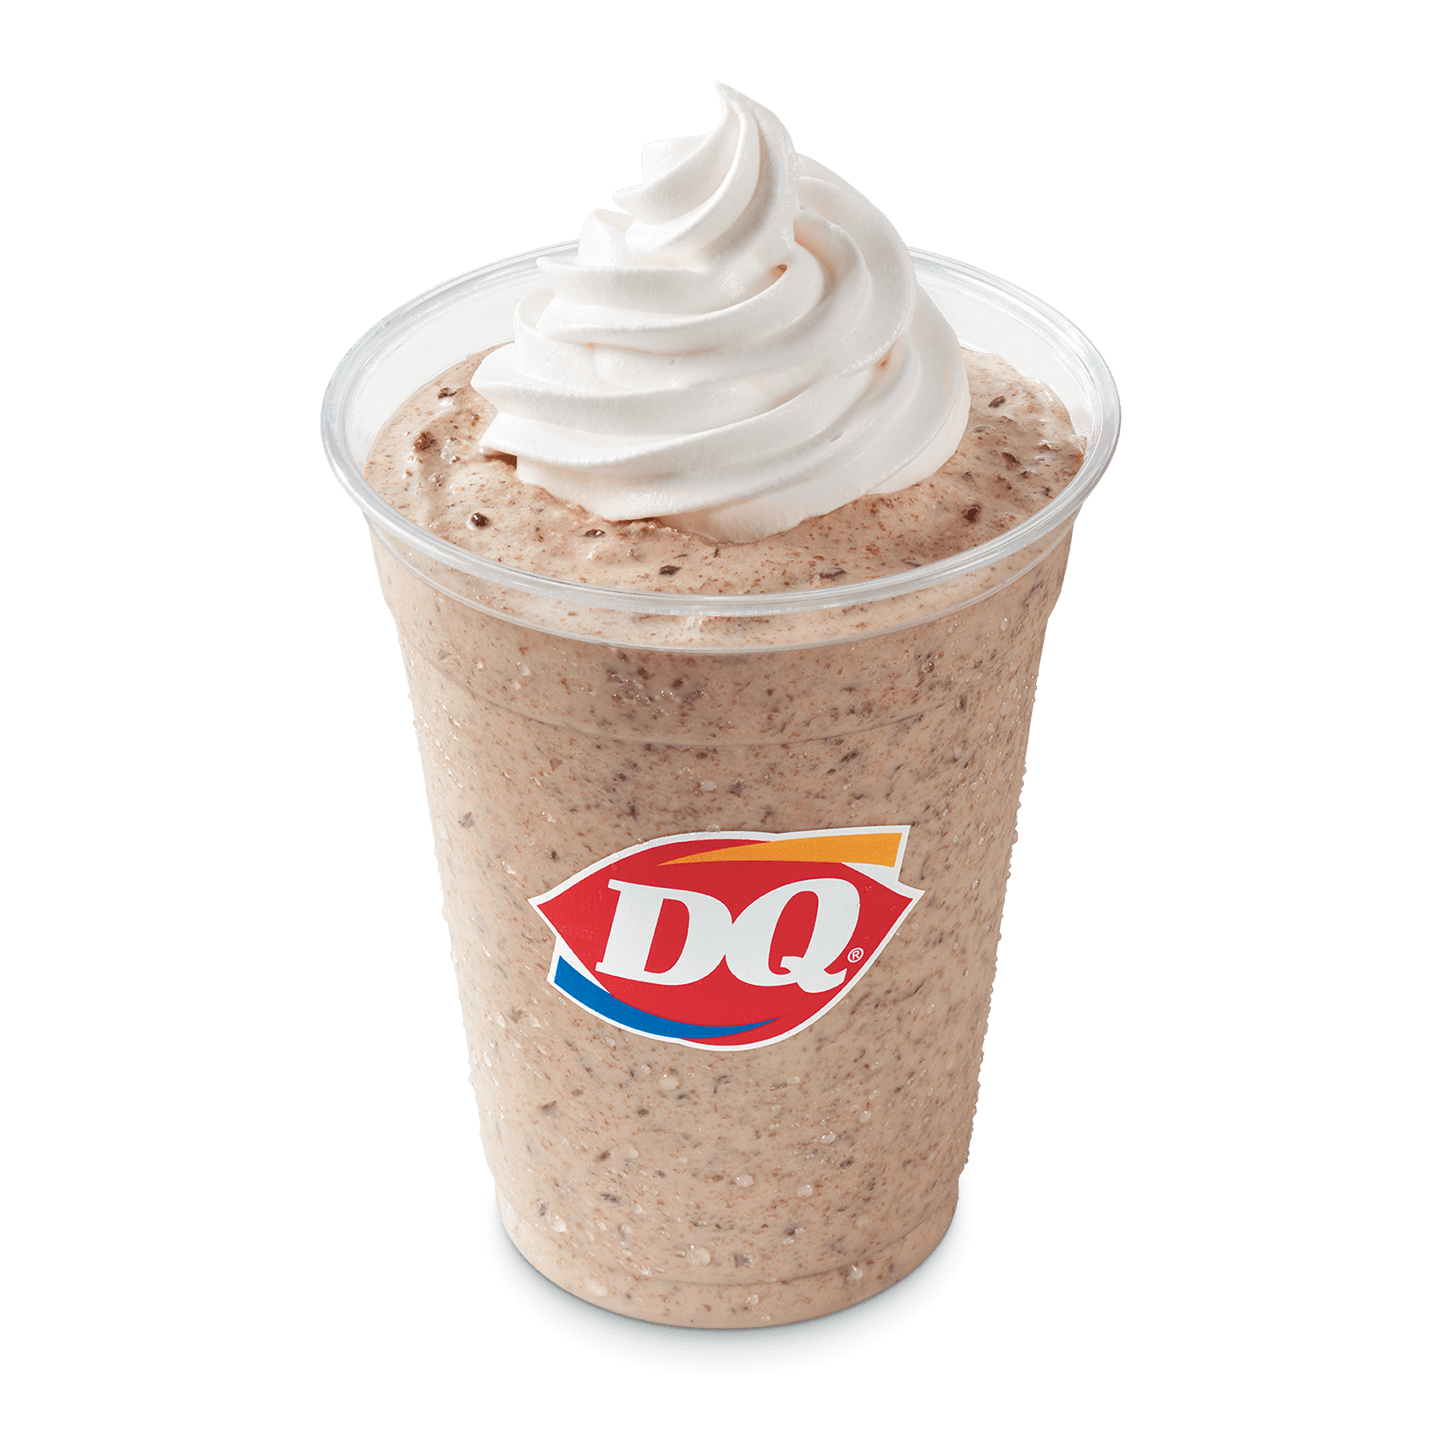 Dairy Queen Small Choco Hazelnut Chip Shake Nutrition Facts